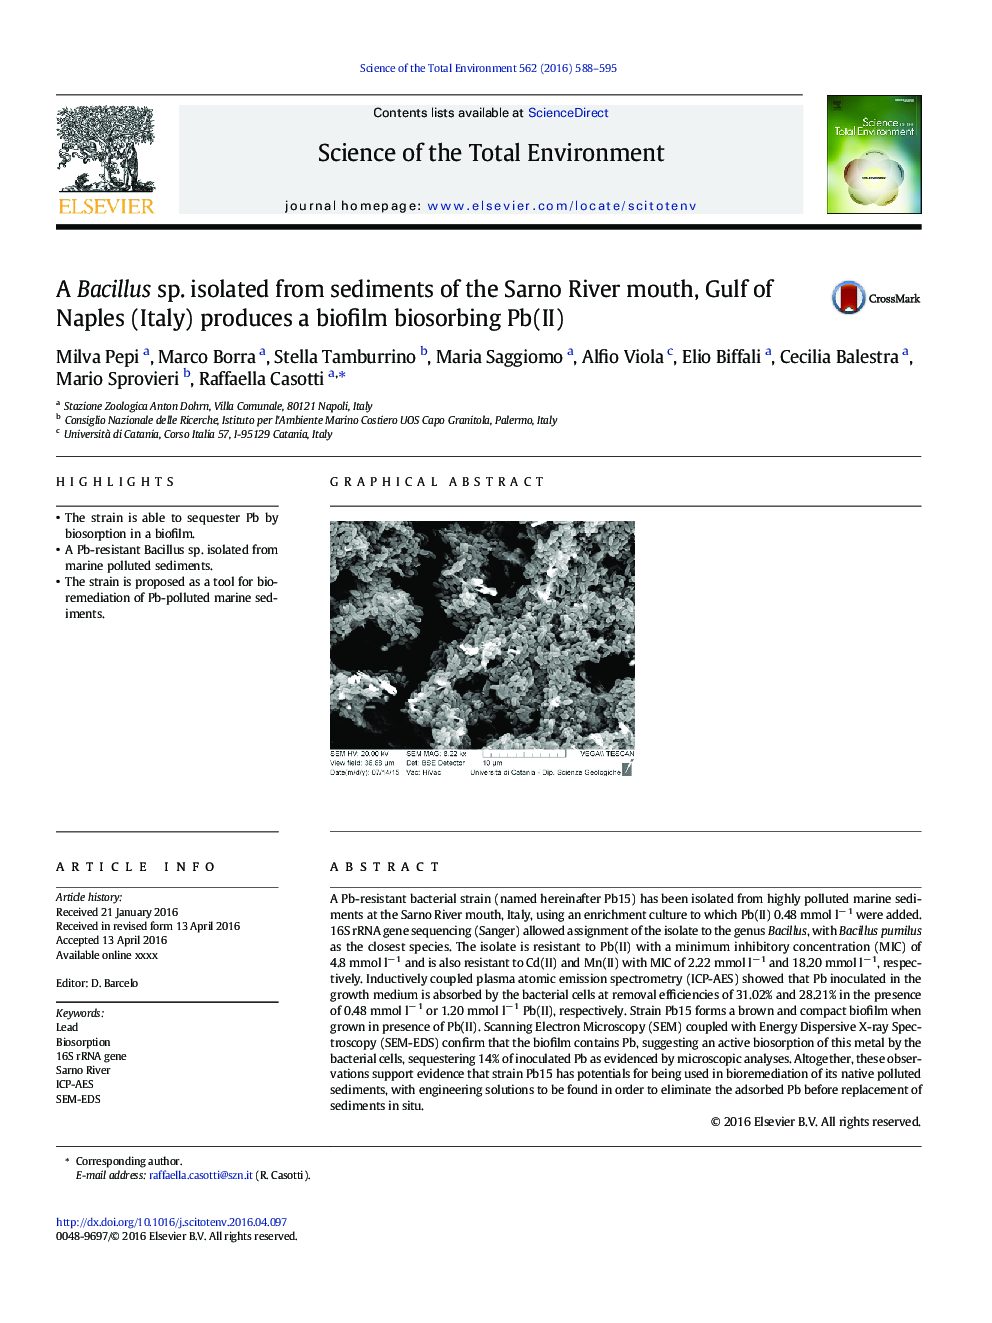 A Bacillus sp. isolated from sediments of the Sarno River mouth, Gulf of Naples (Italy) produces a biofilm biosorbing Pb(II)